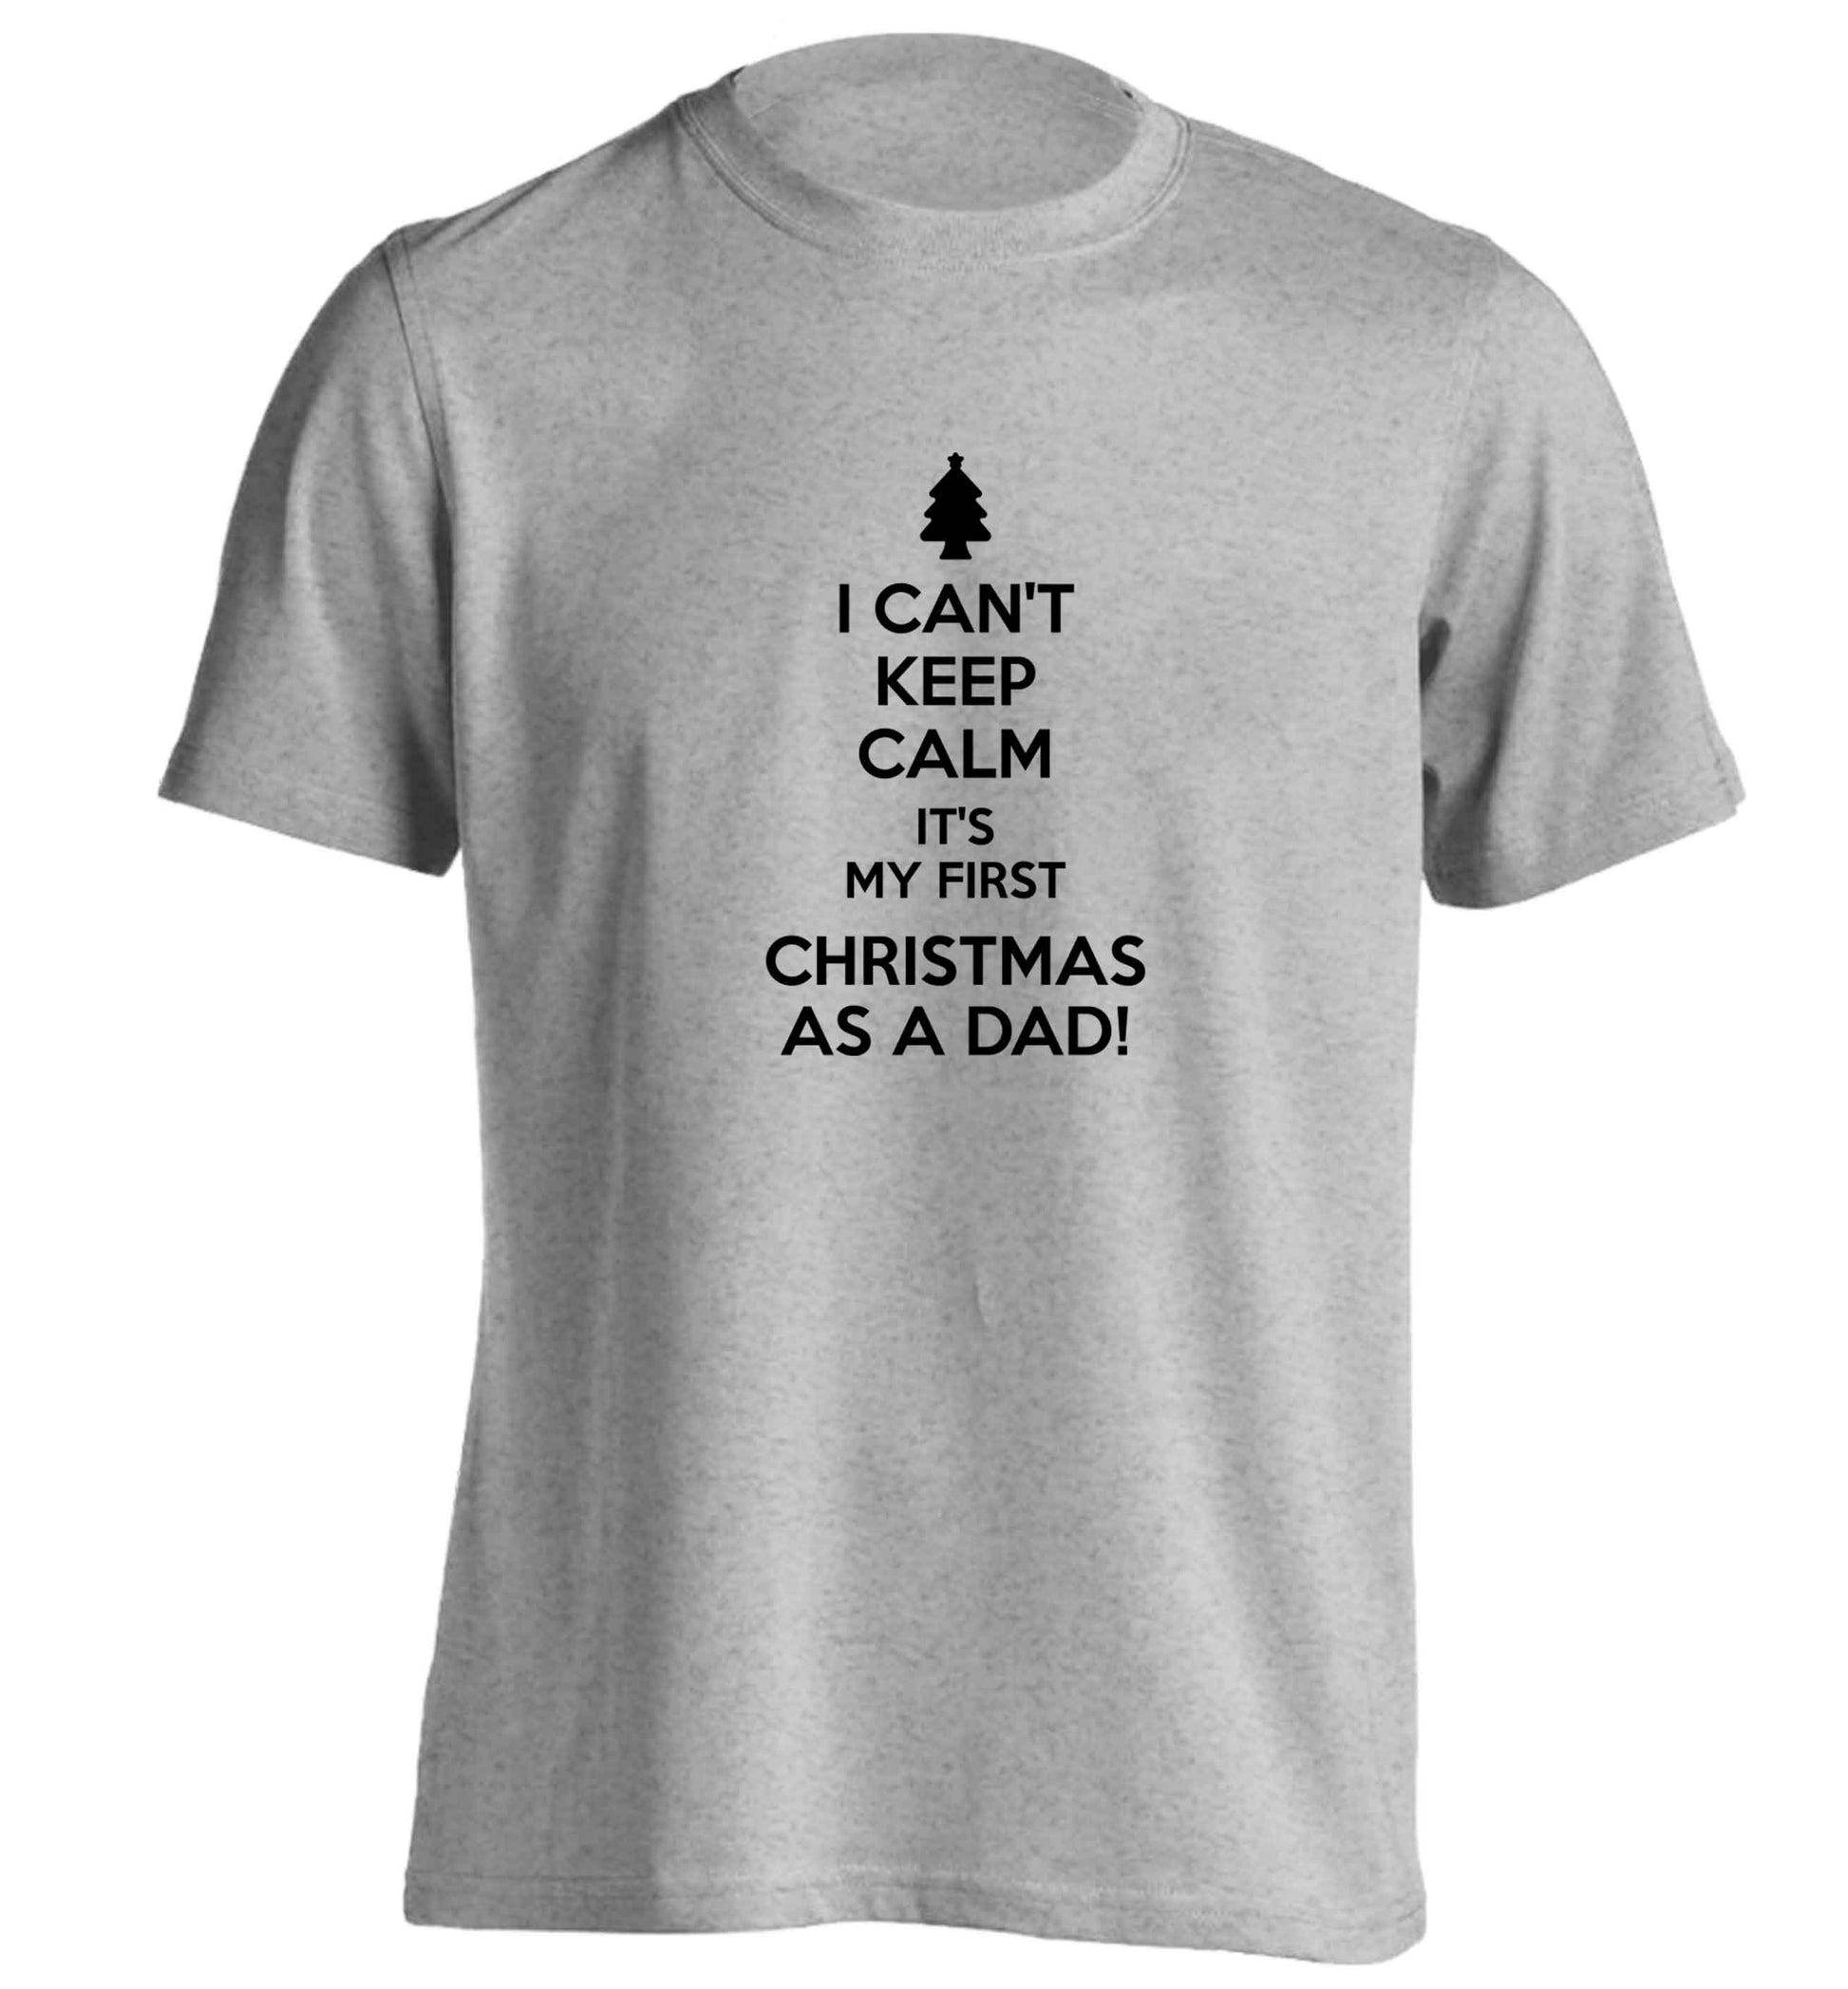 I can't keep calm it's my first Christmas as a dad adults unisex grey Tshirt 2XL